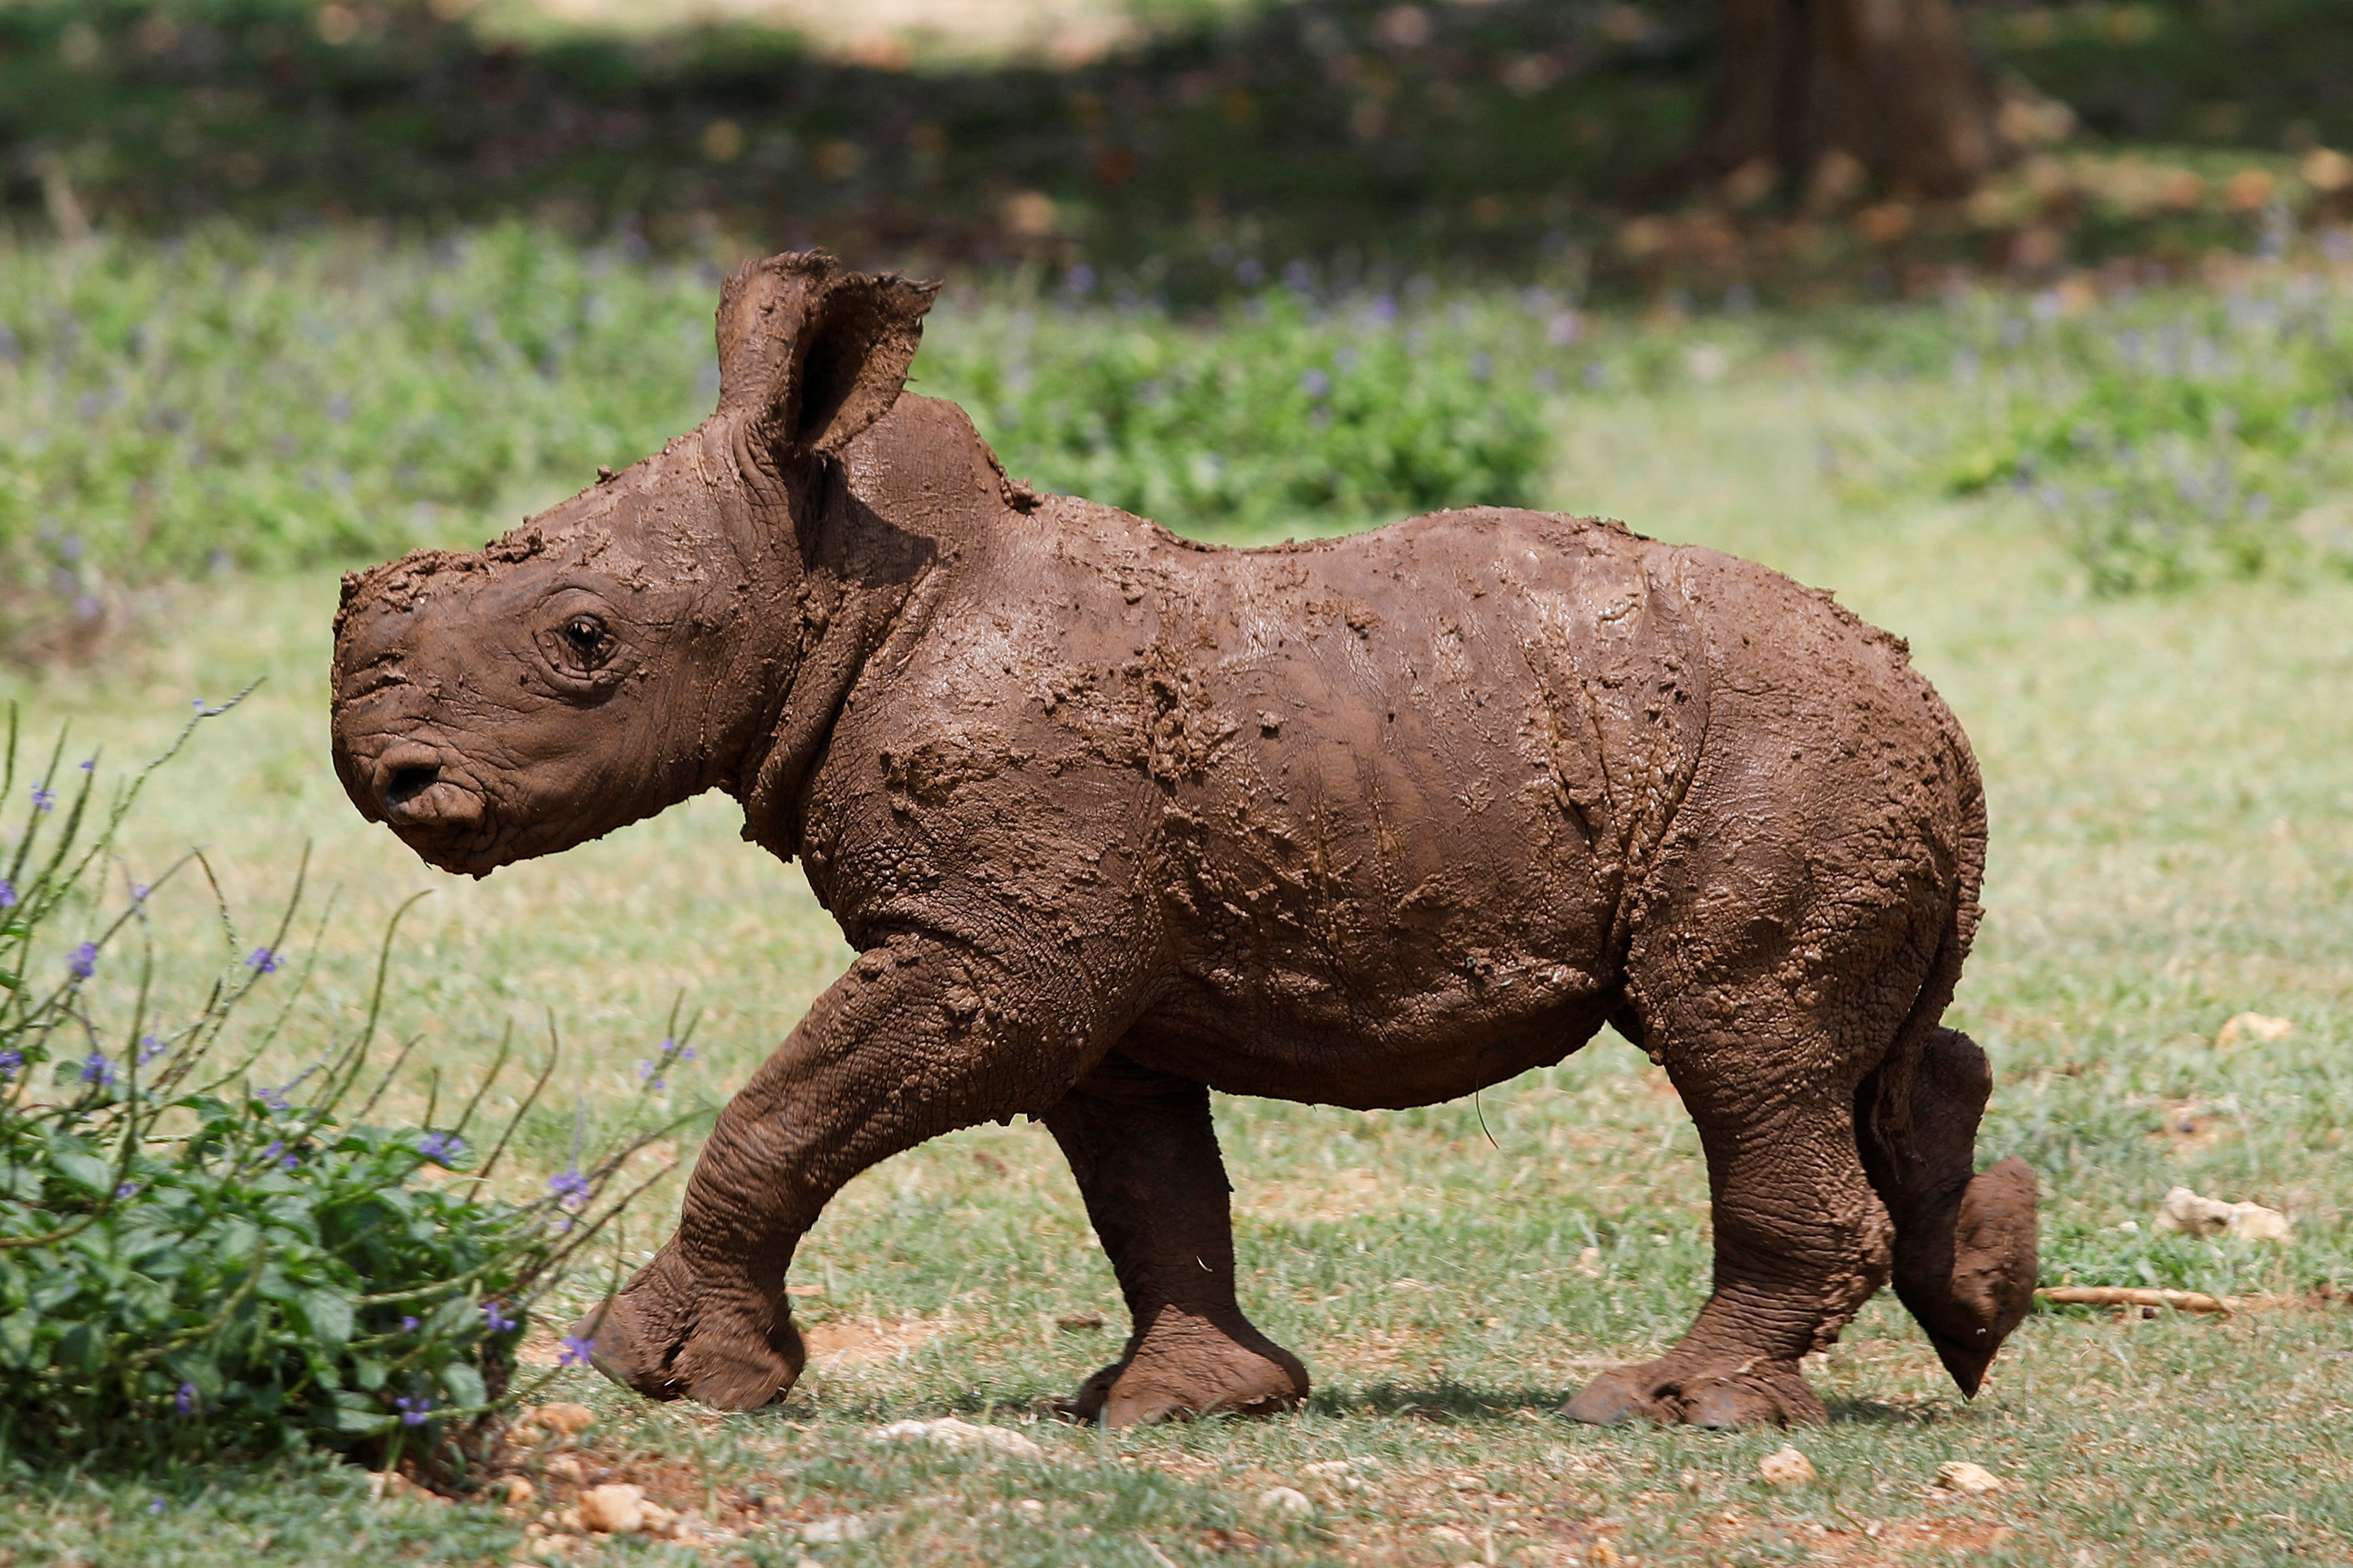 Cuba's National Zoo introduces first white rhinoceros born in the park.